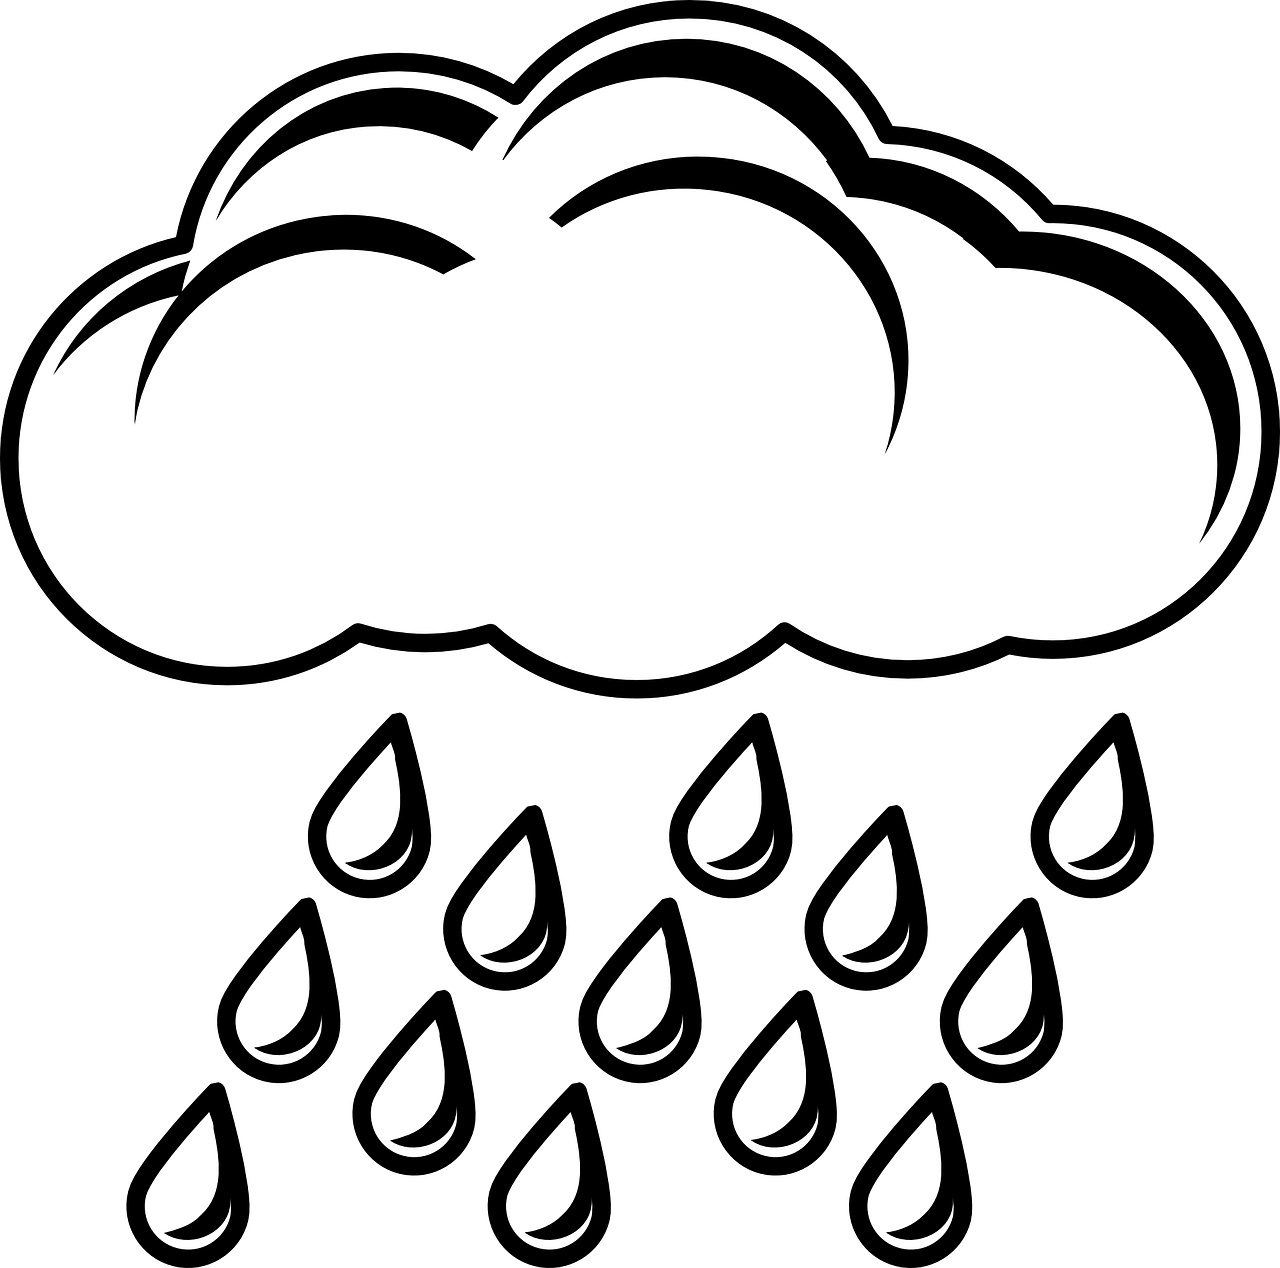 a cloud with rain drops on a black background, vector art, by Odhise Paskali, pixabay, cumulus tattoos, rain sensor, 5 feet away, black and white”